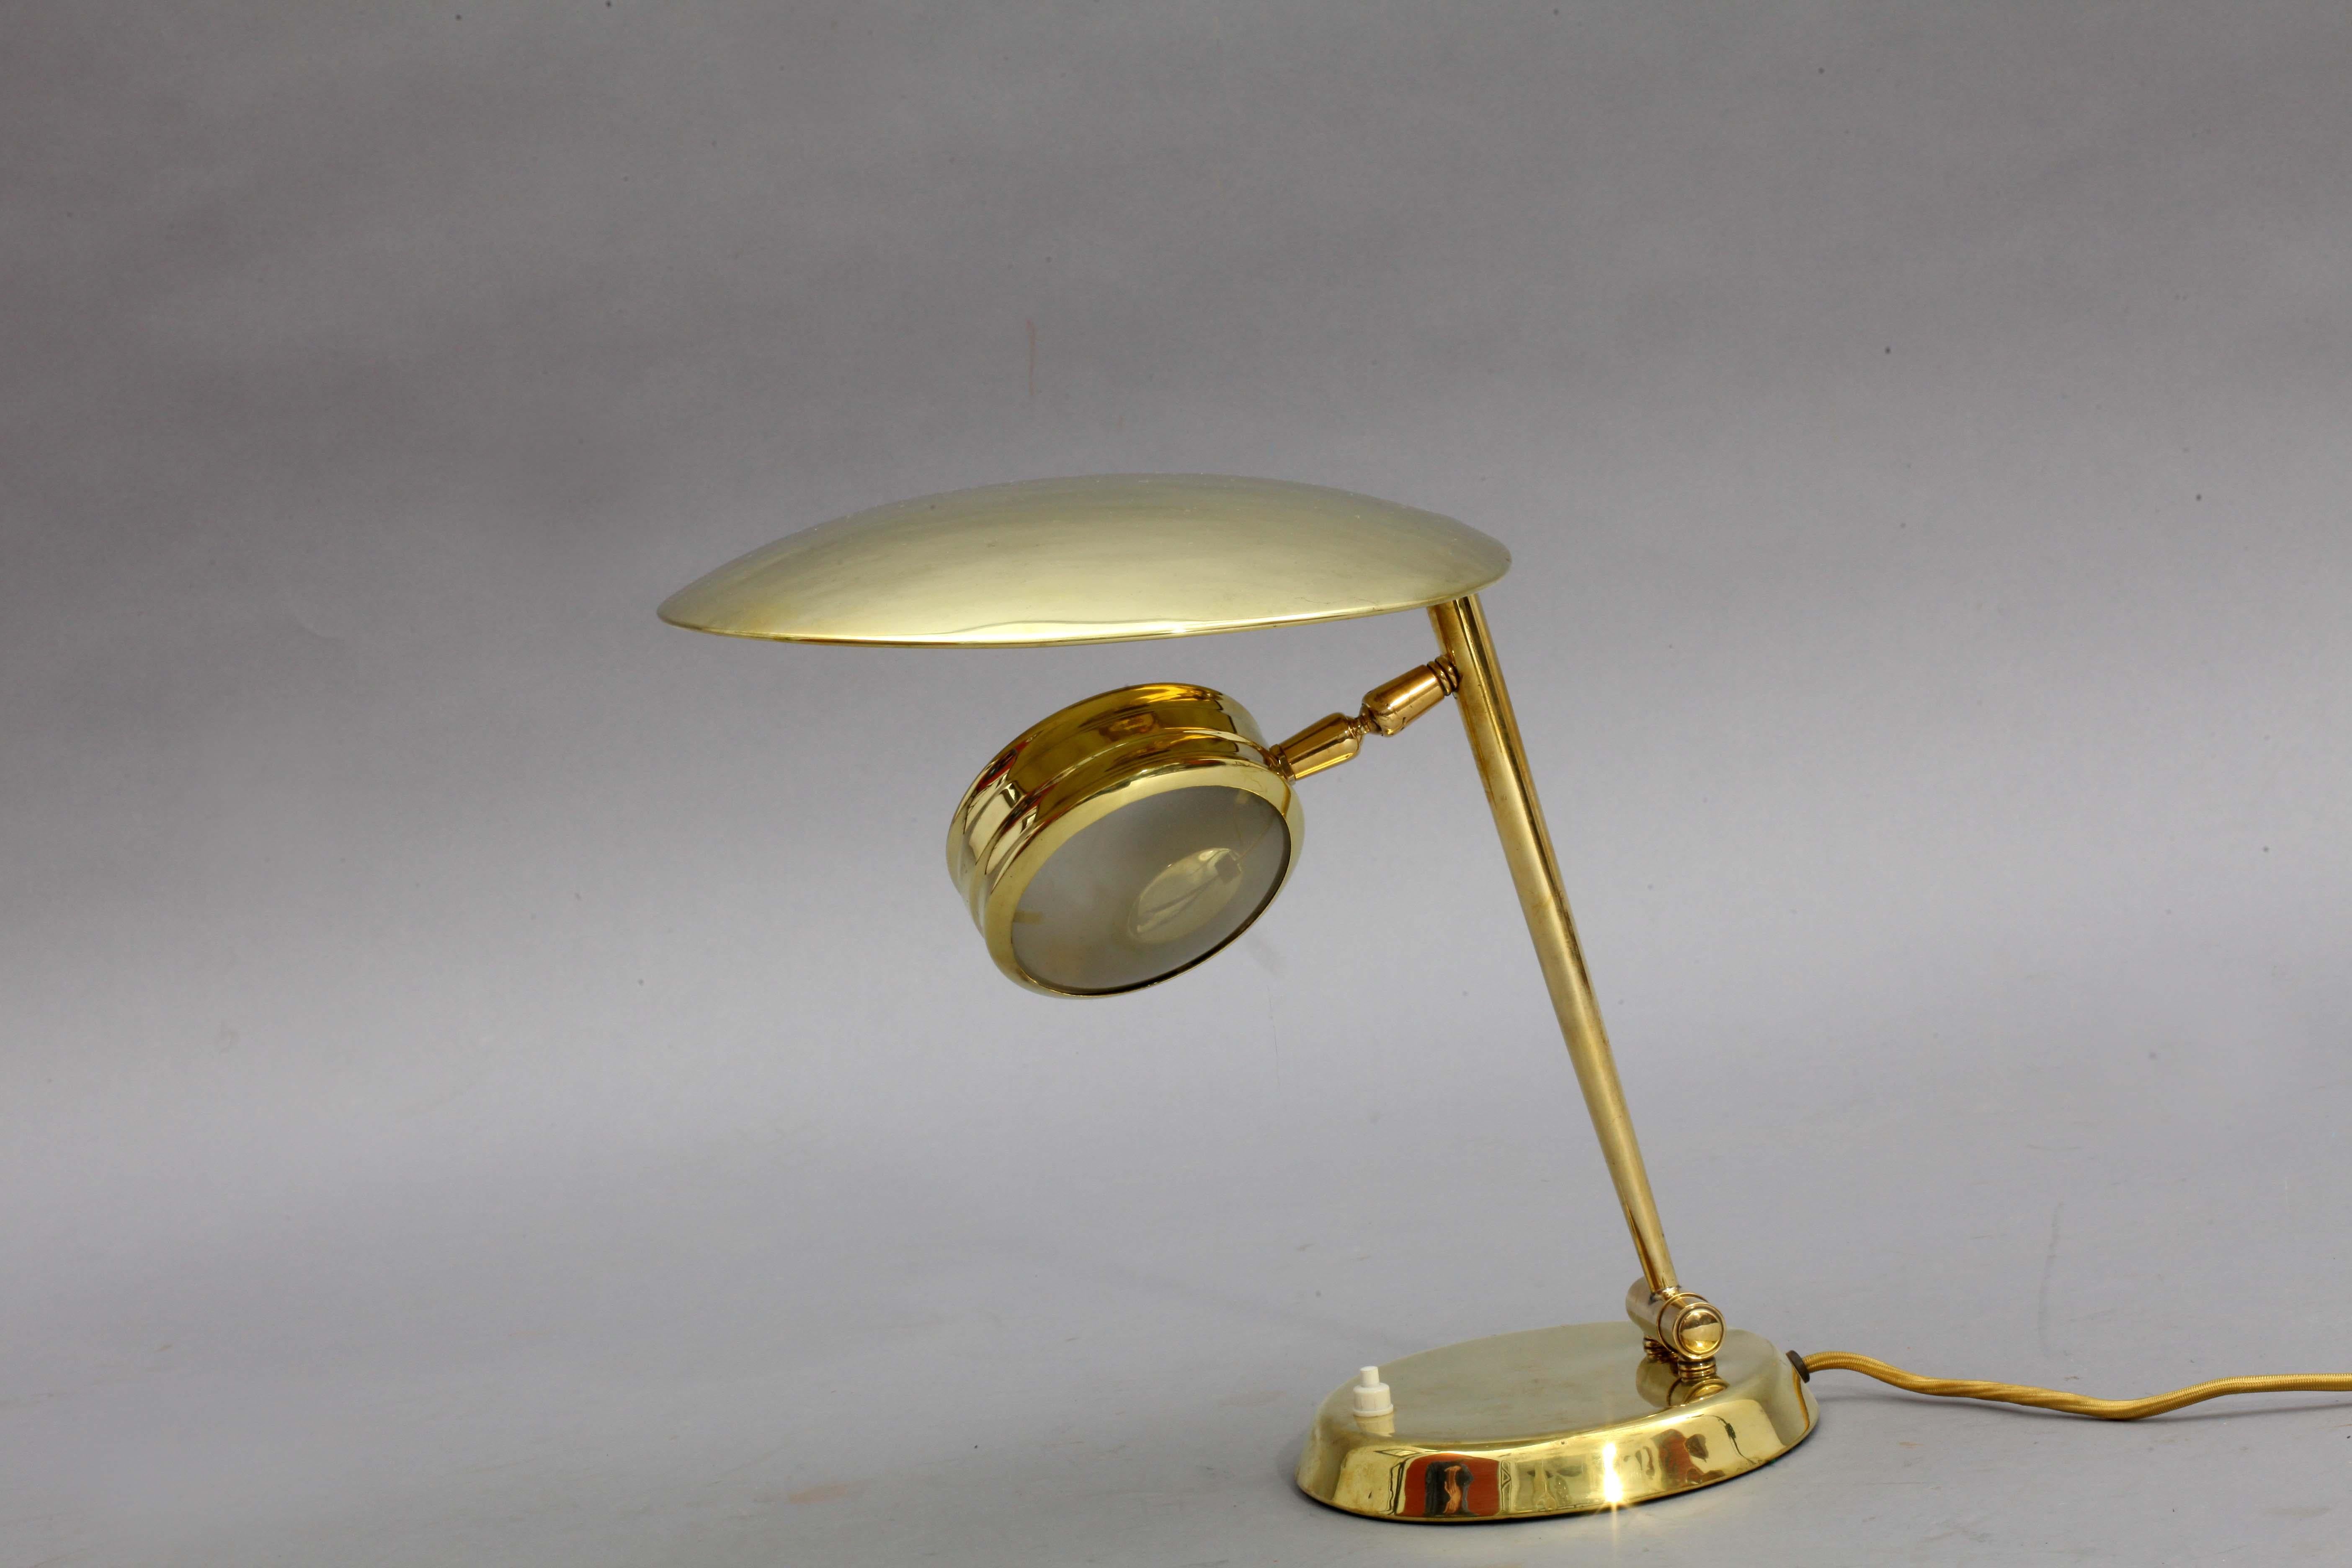 Rare table lamp
Lumen, Italy, 1950
brass,
movable glass reflector.